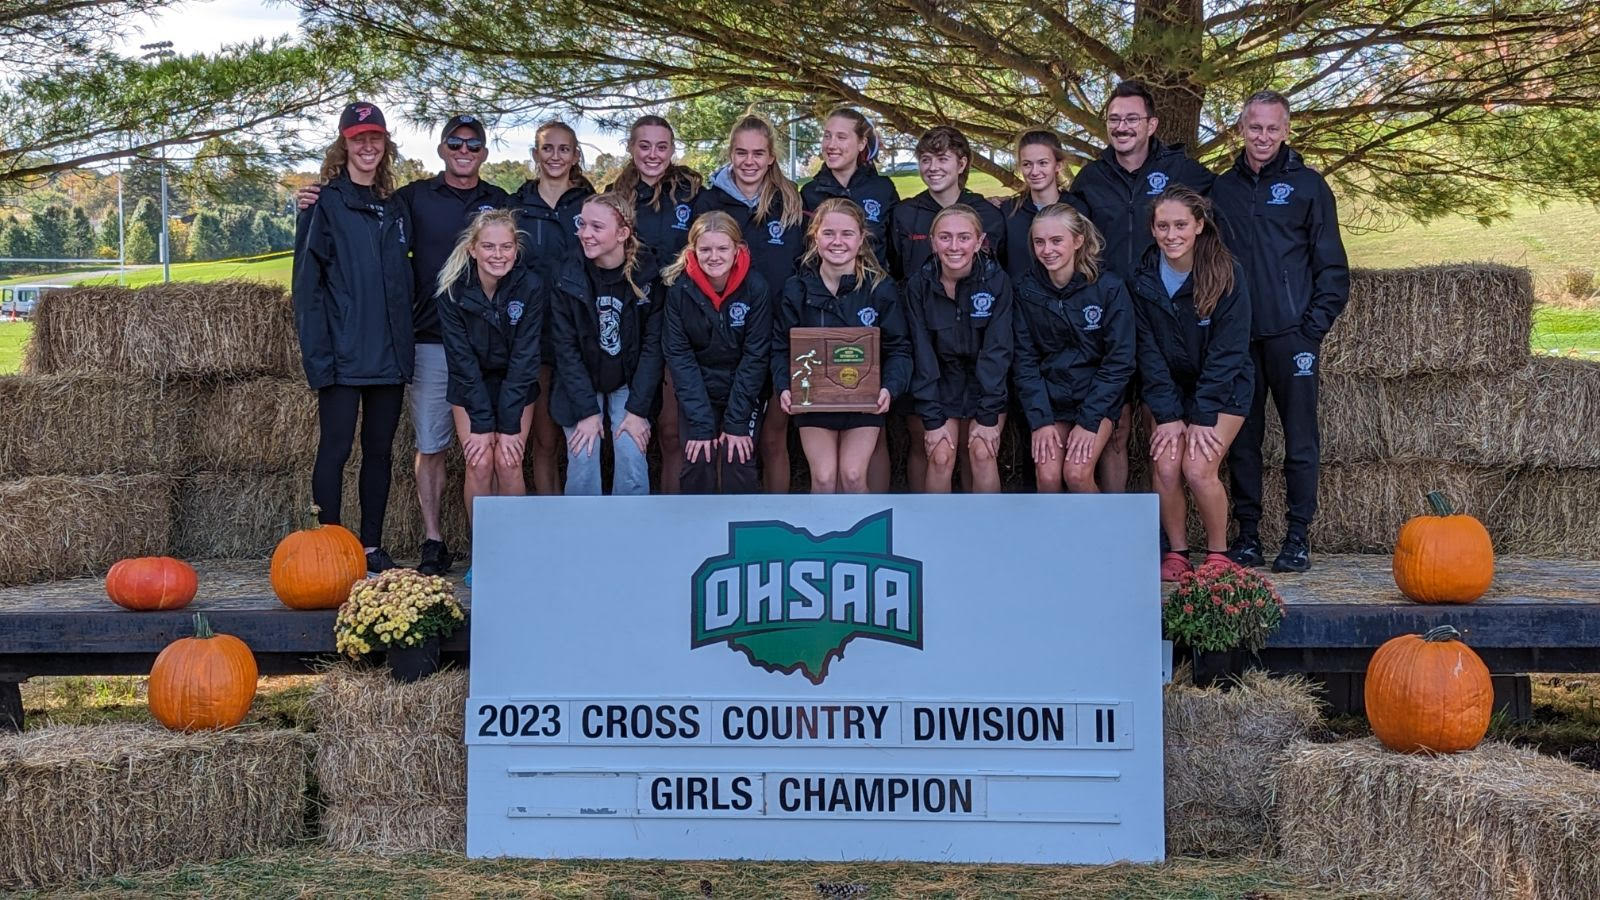 Women's CC repeat as district champs